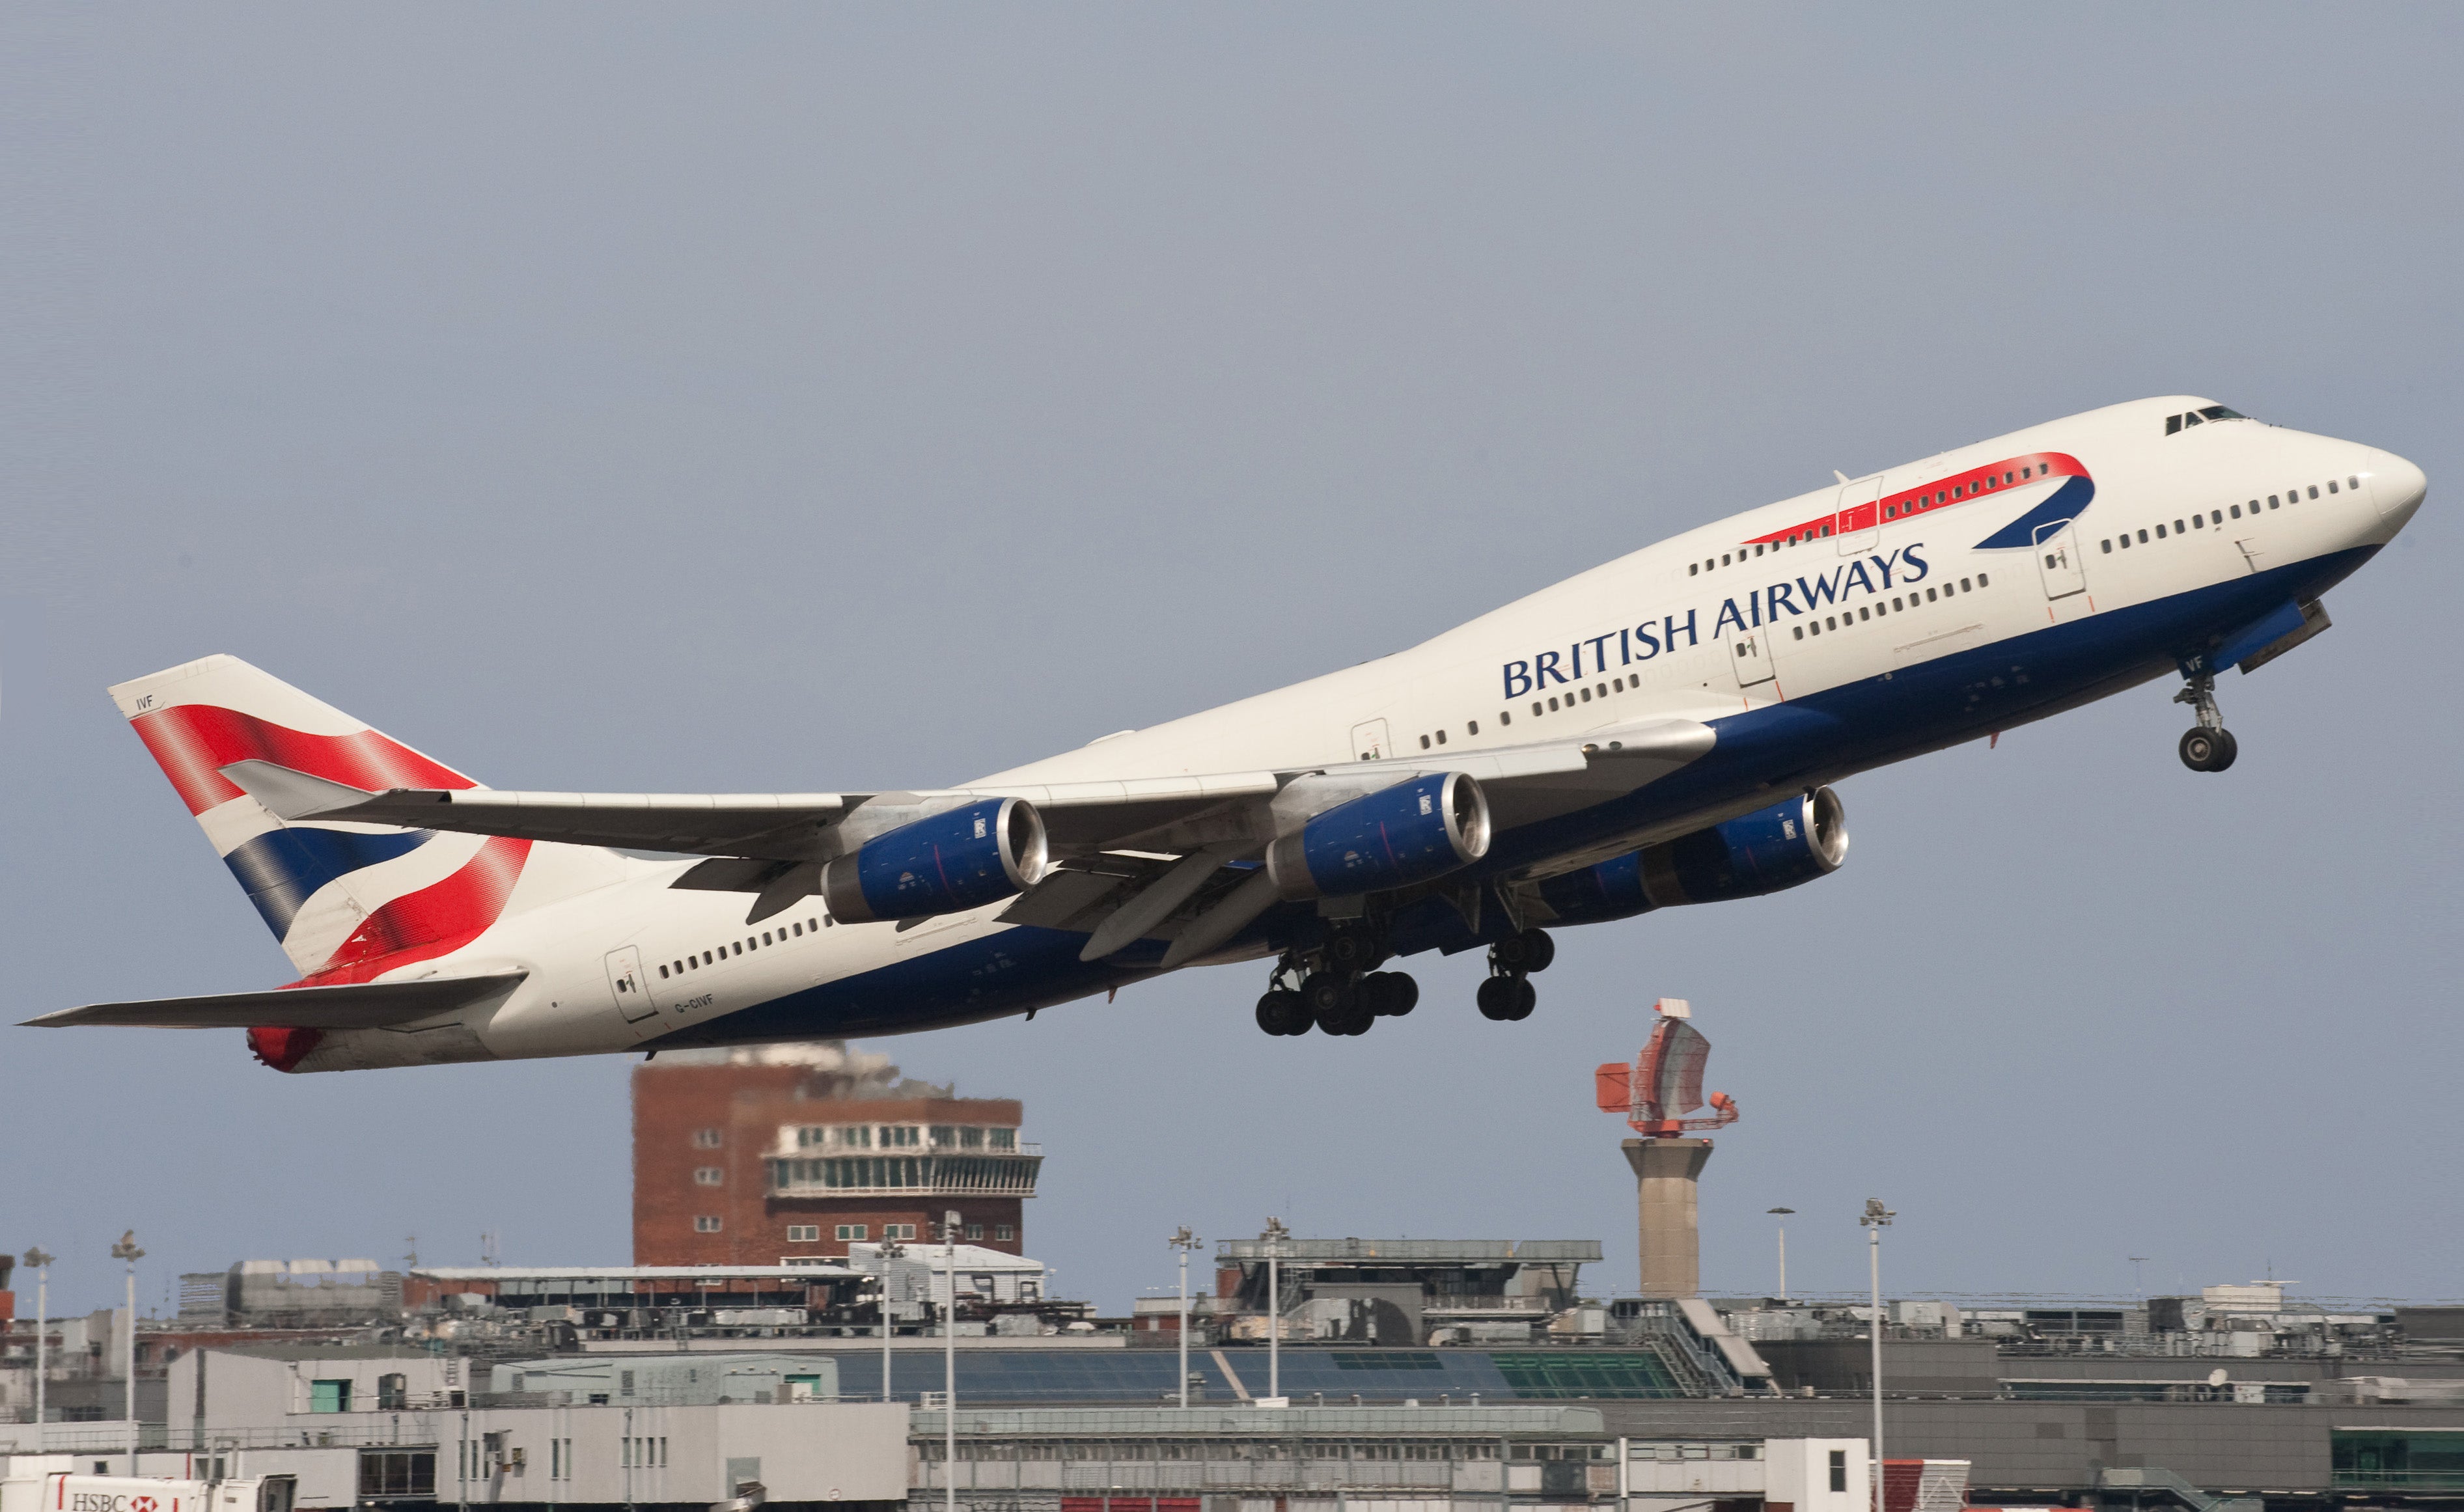 British Airways check-in outage leaves passengers stranded